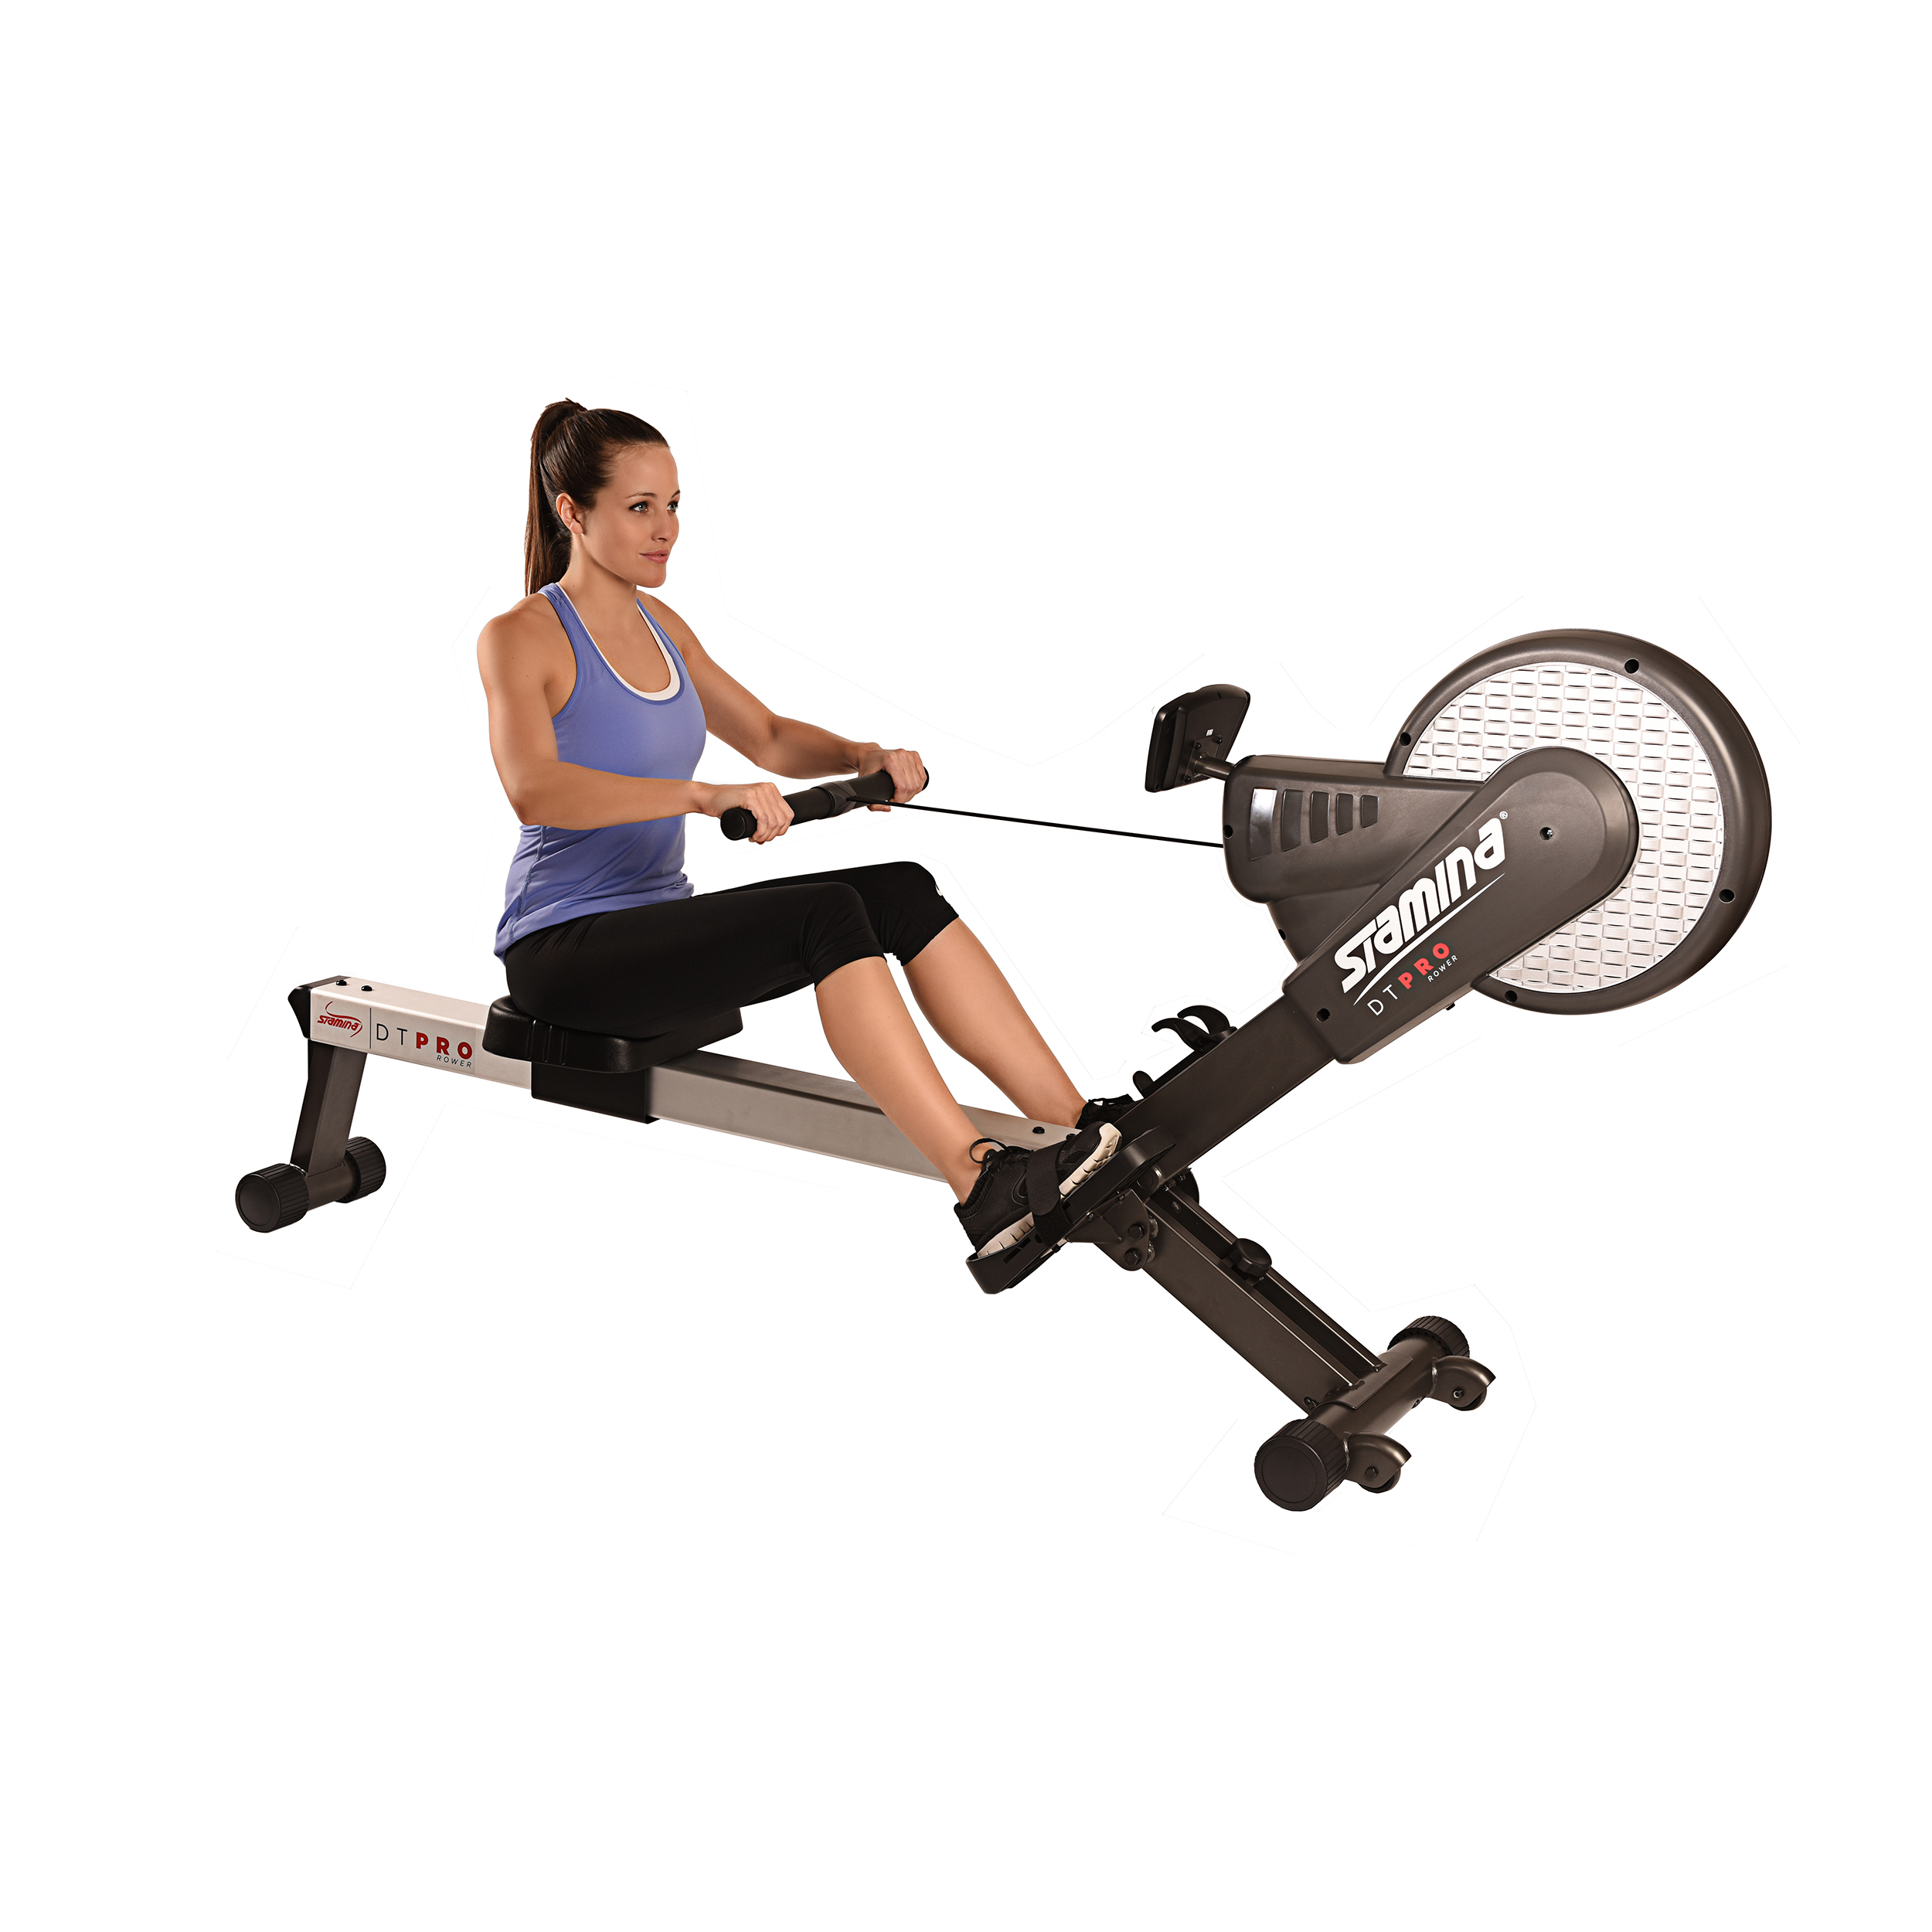 Rowing Machine Rower Home Exercise Equipment Stamina Fitness Cardio Workout Gym 